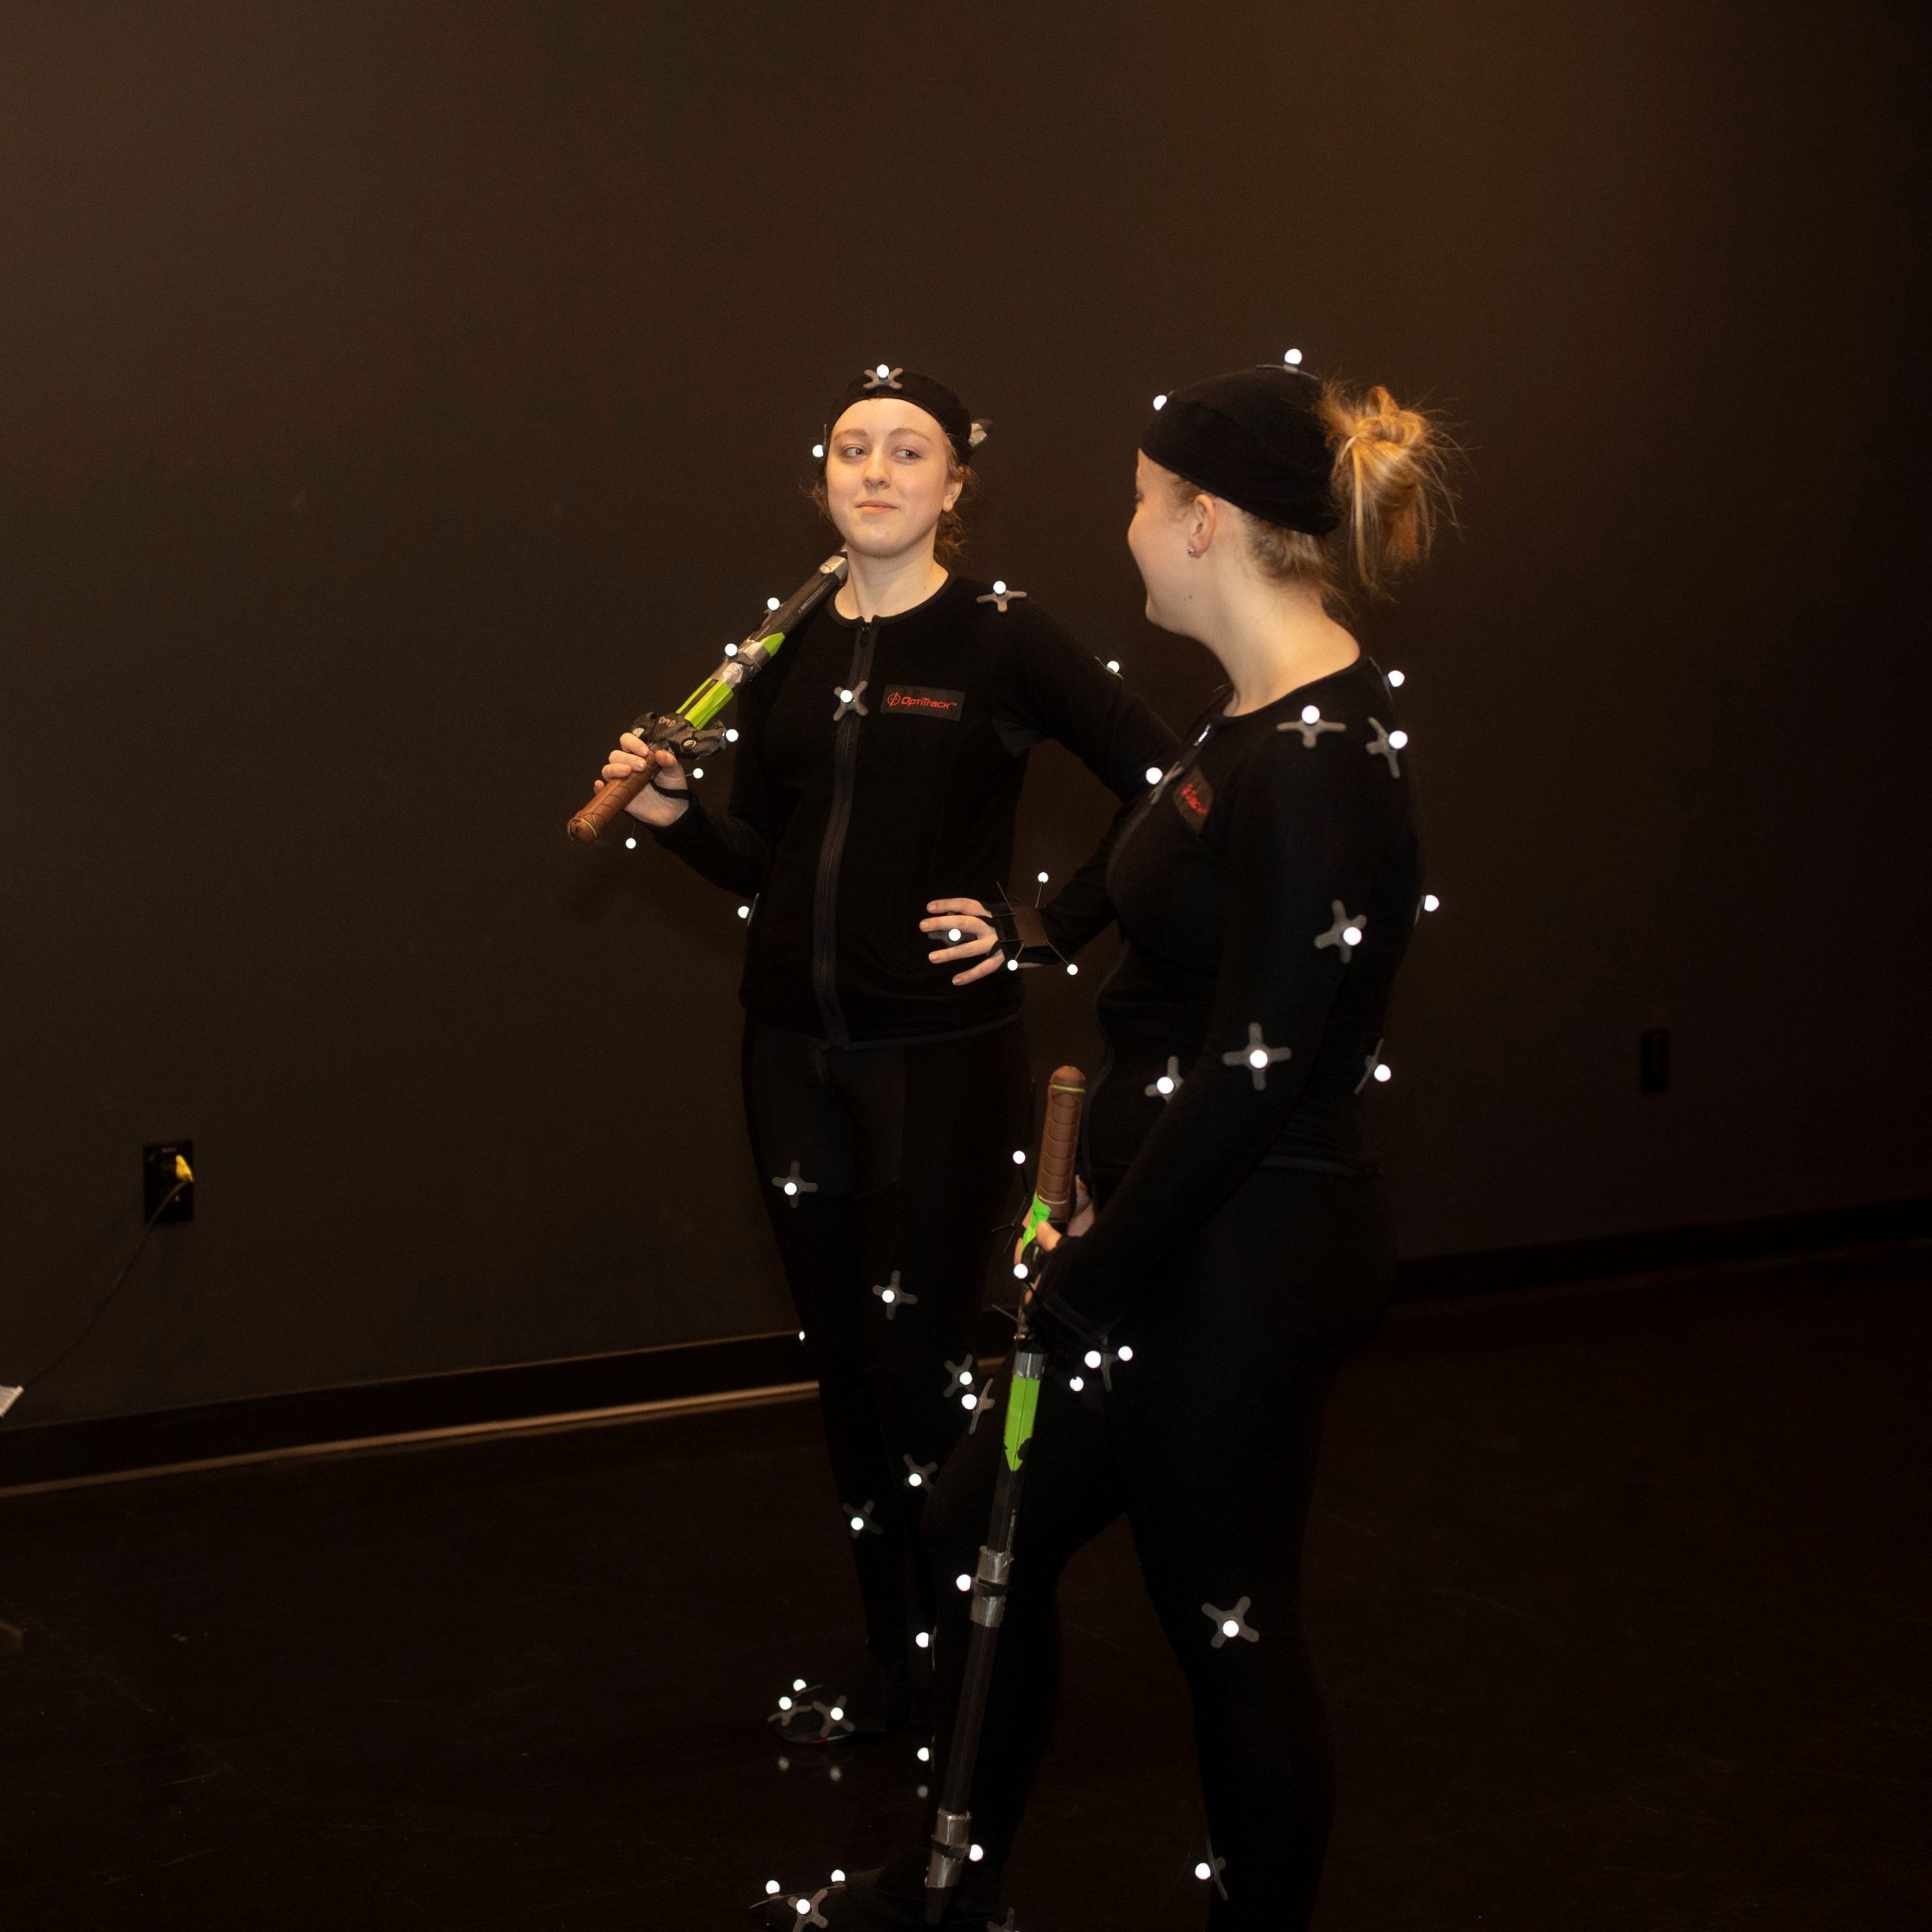 Students working in the motion capture studio